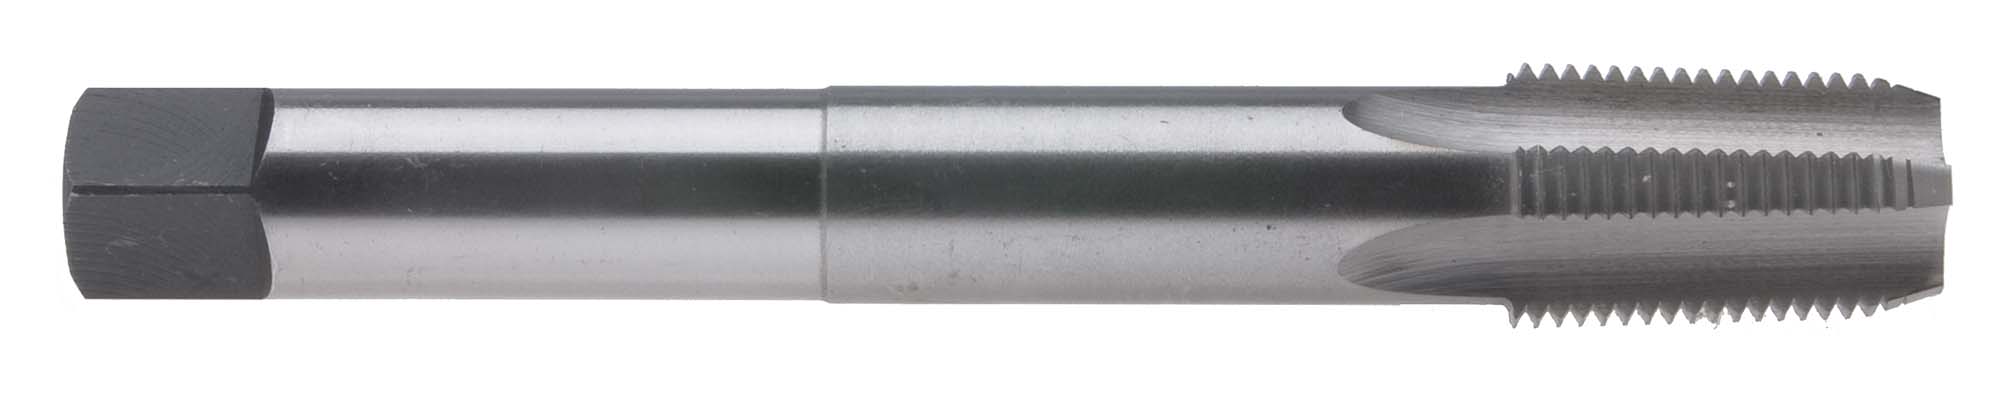 1/4"-18 6" Long National Pipe Taper High Speed Steel Pipe Tap